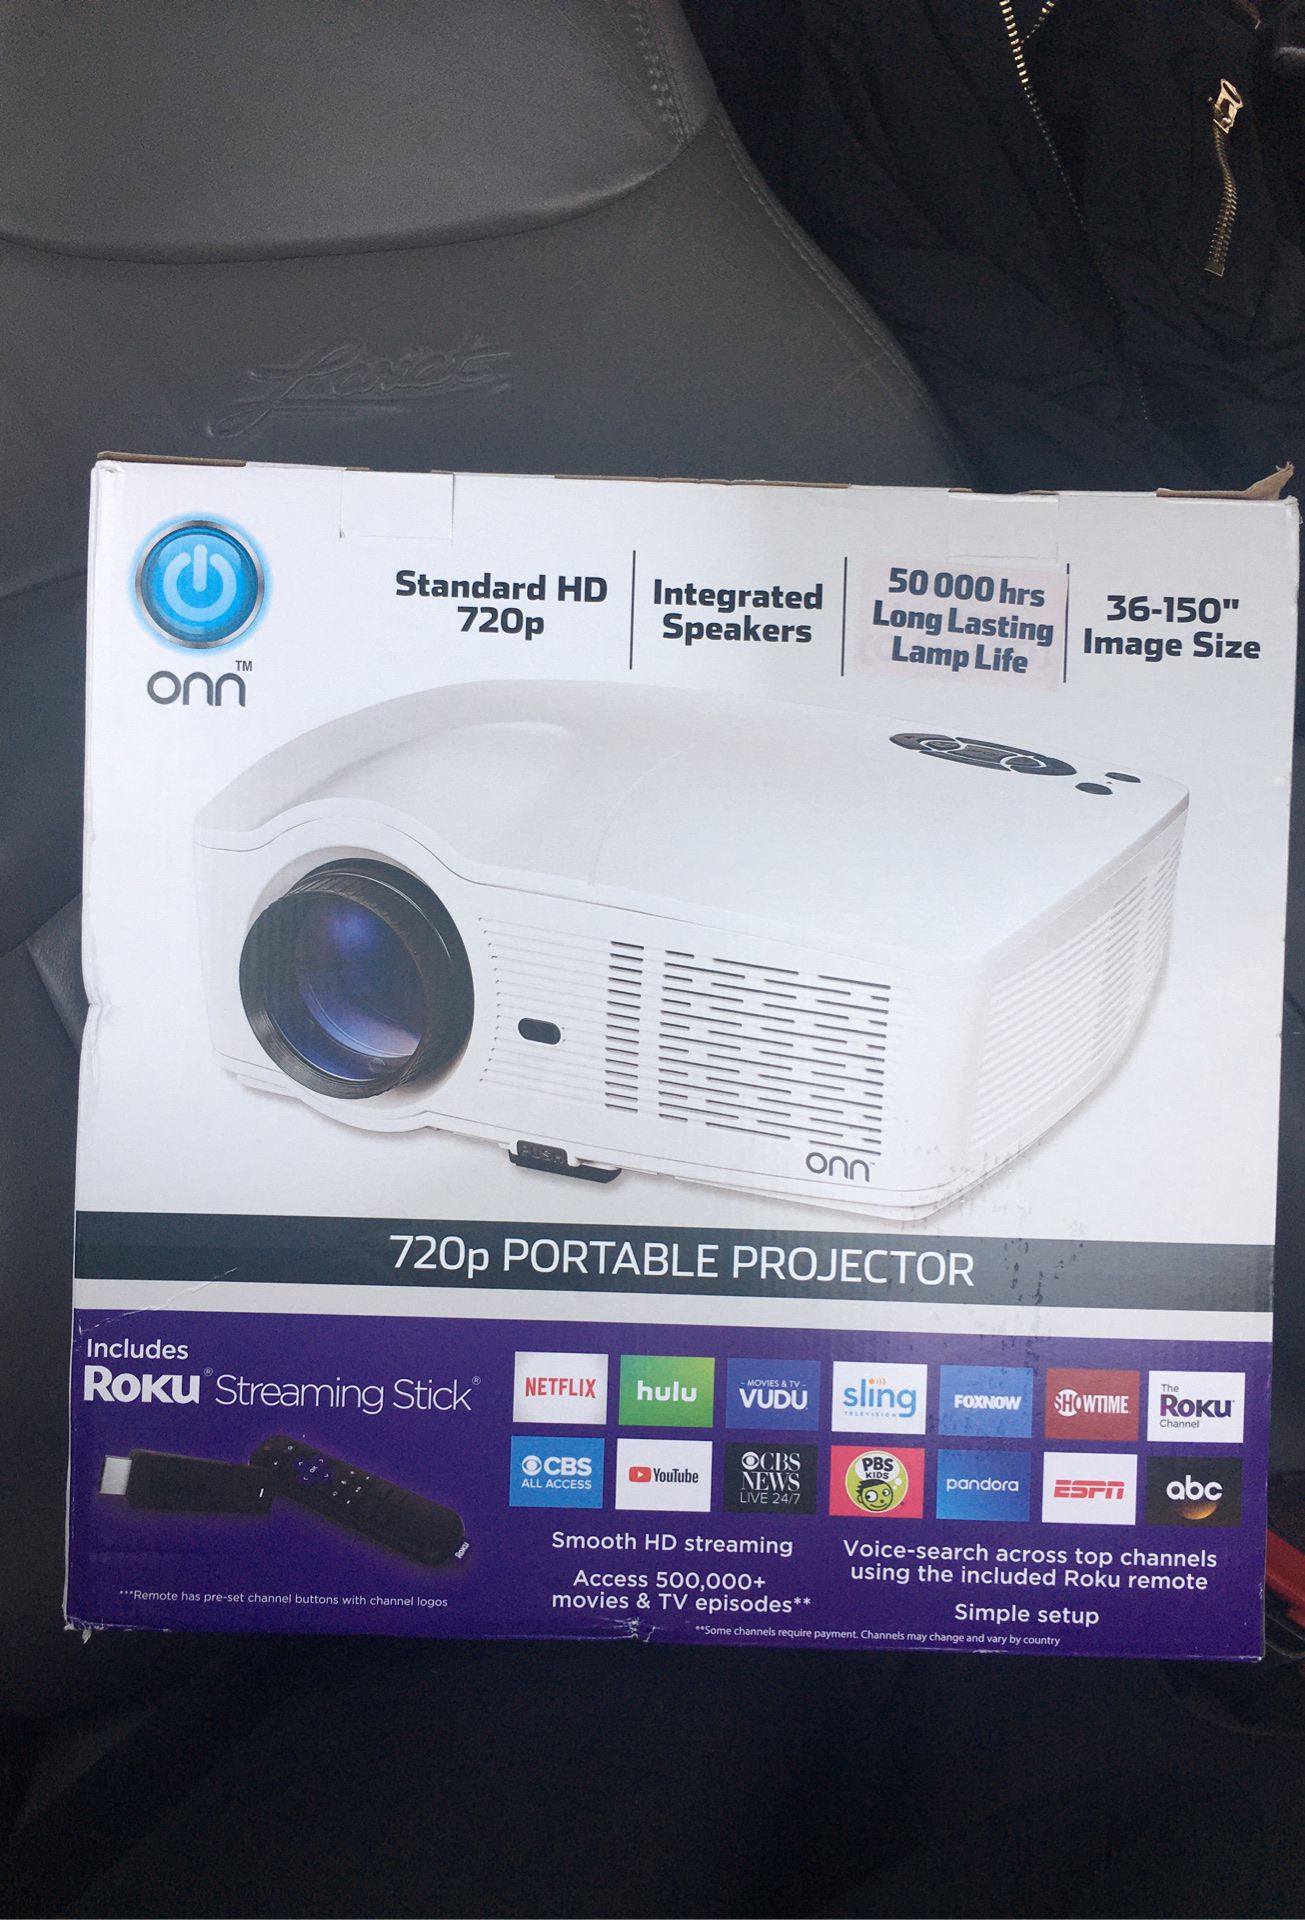 ONN 720p portable projector with roku stick